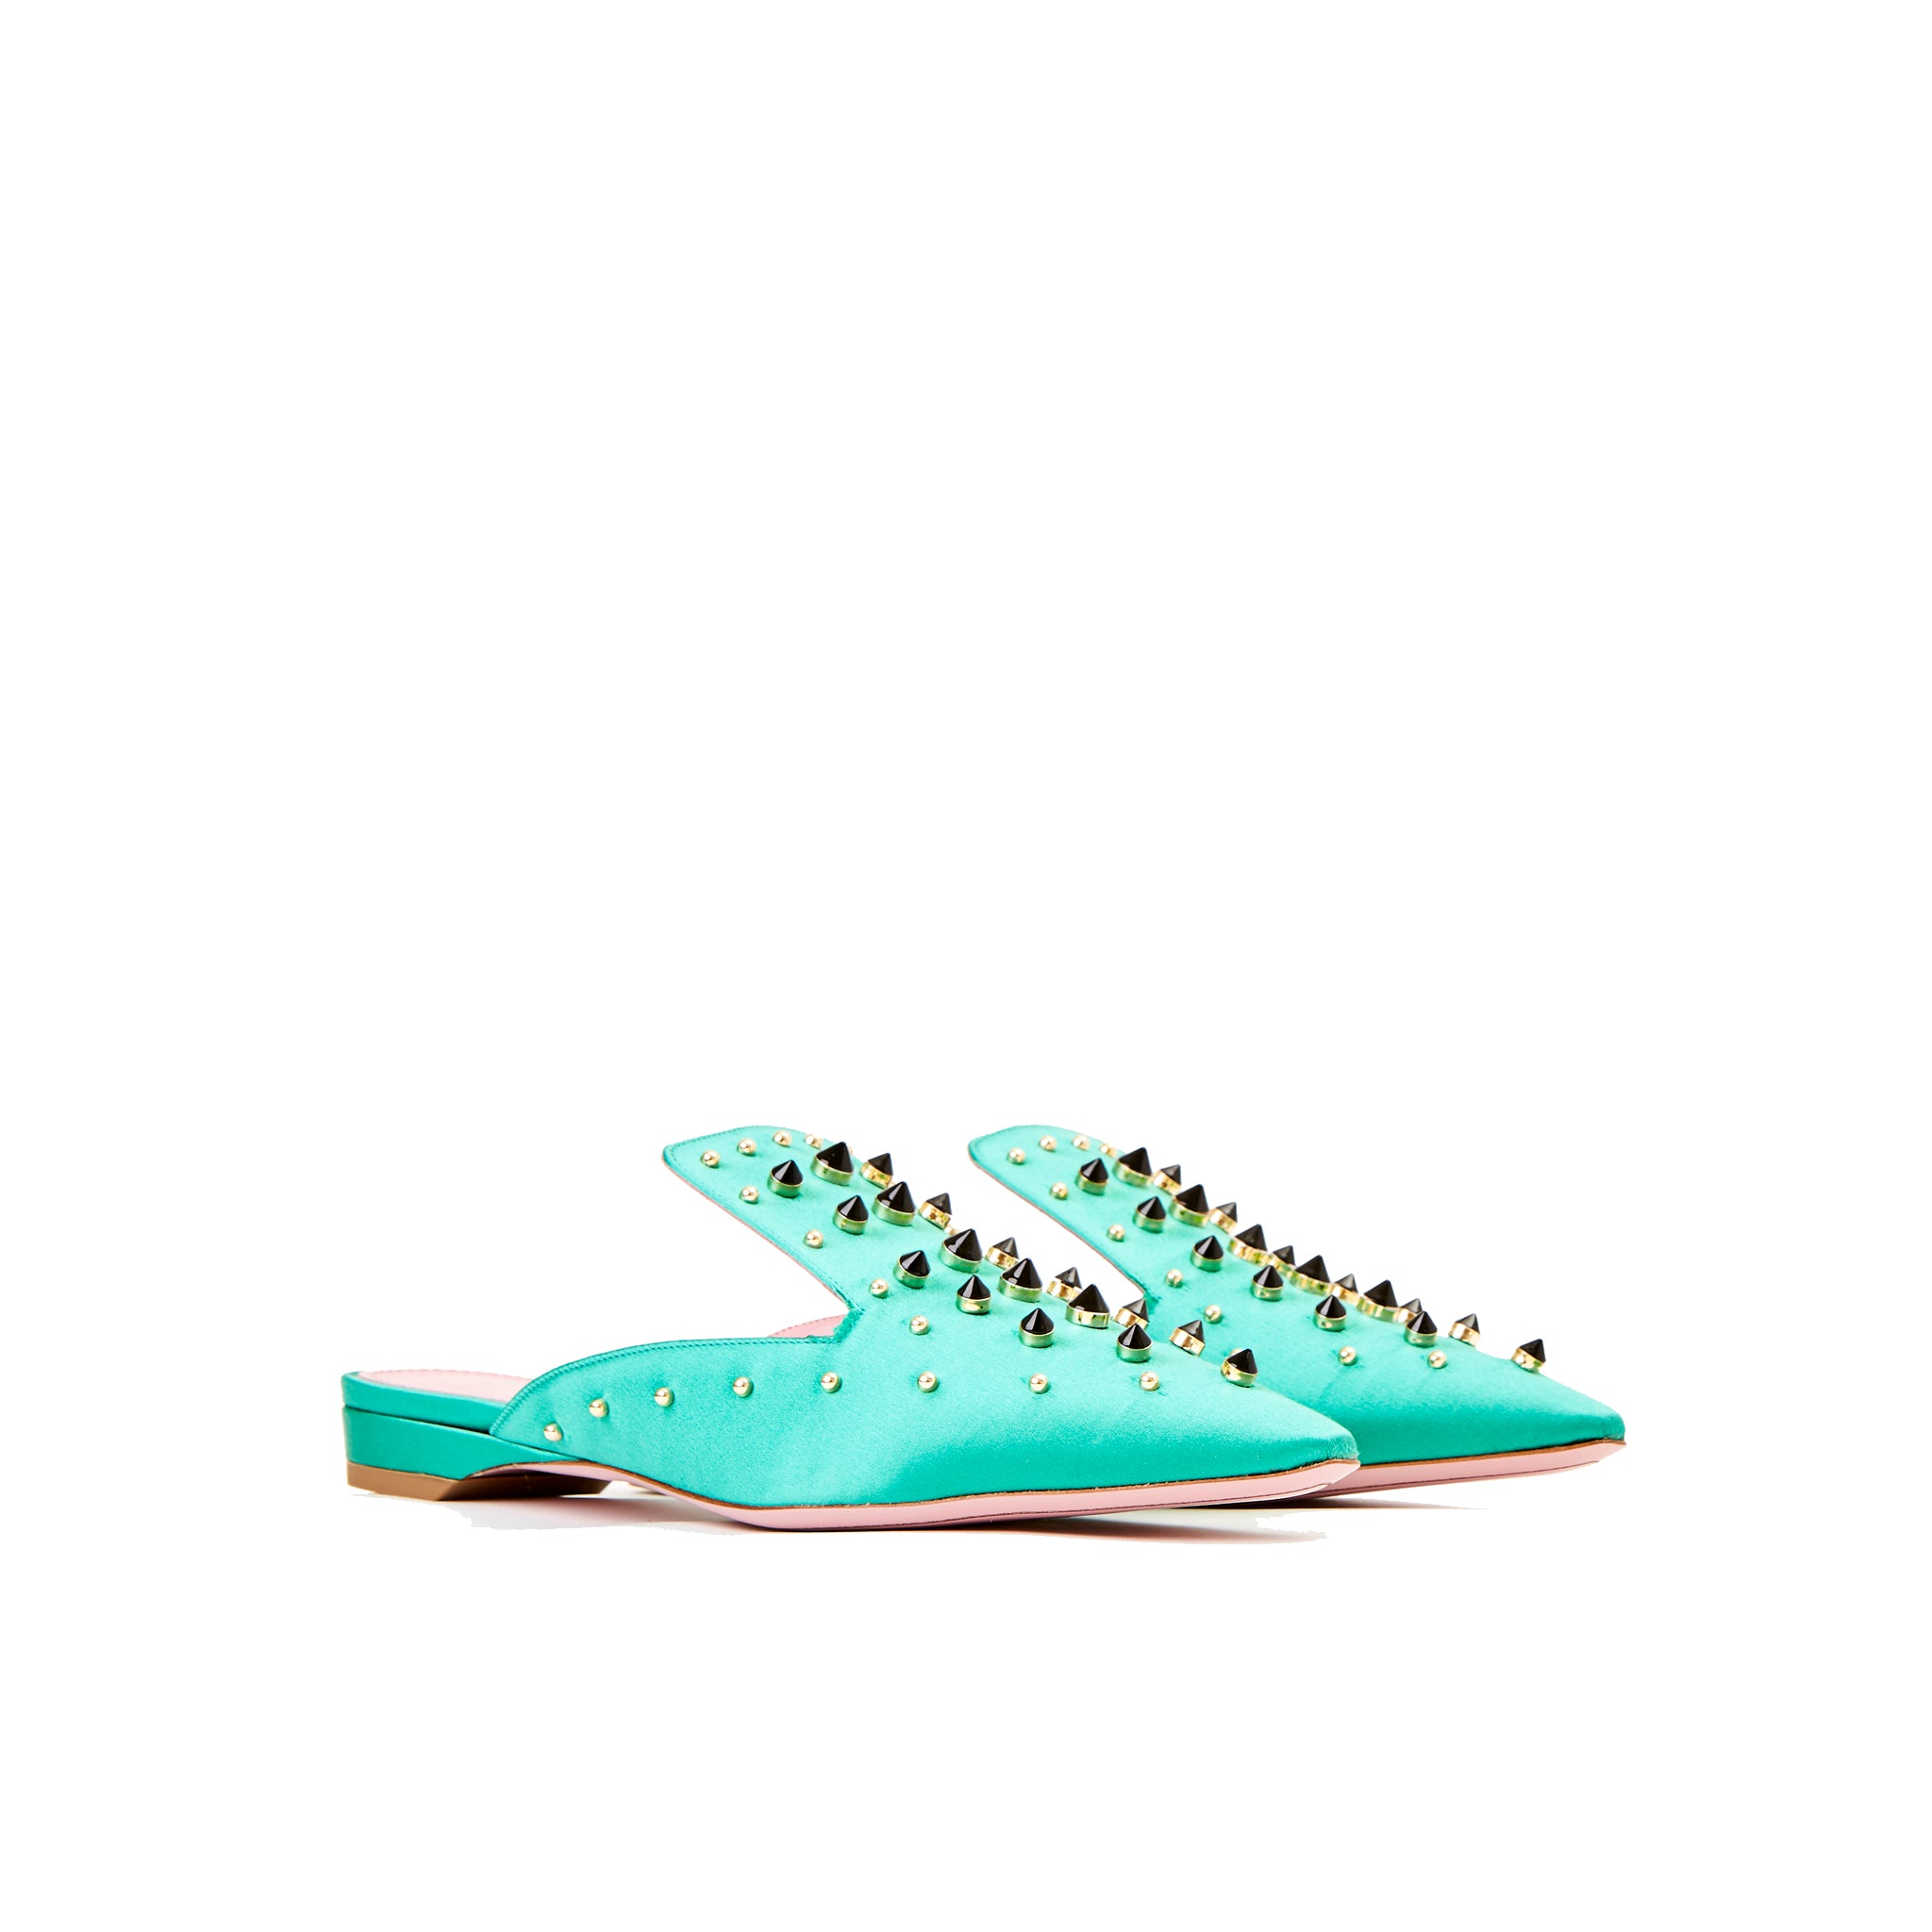 Phare Studded mule in verde silk satin with black and gold studs3/4 view 